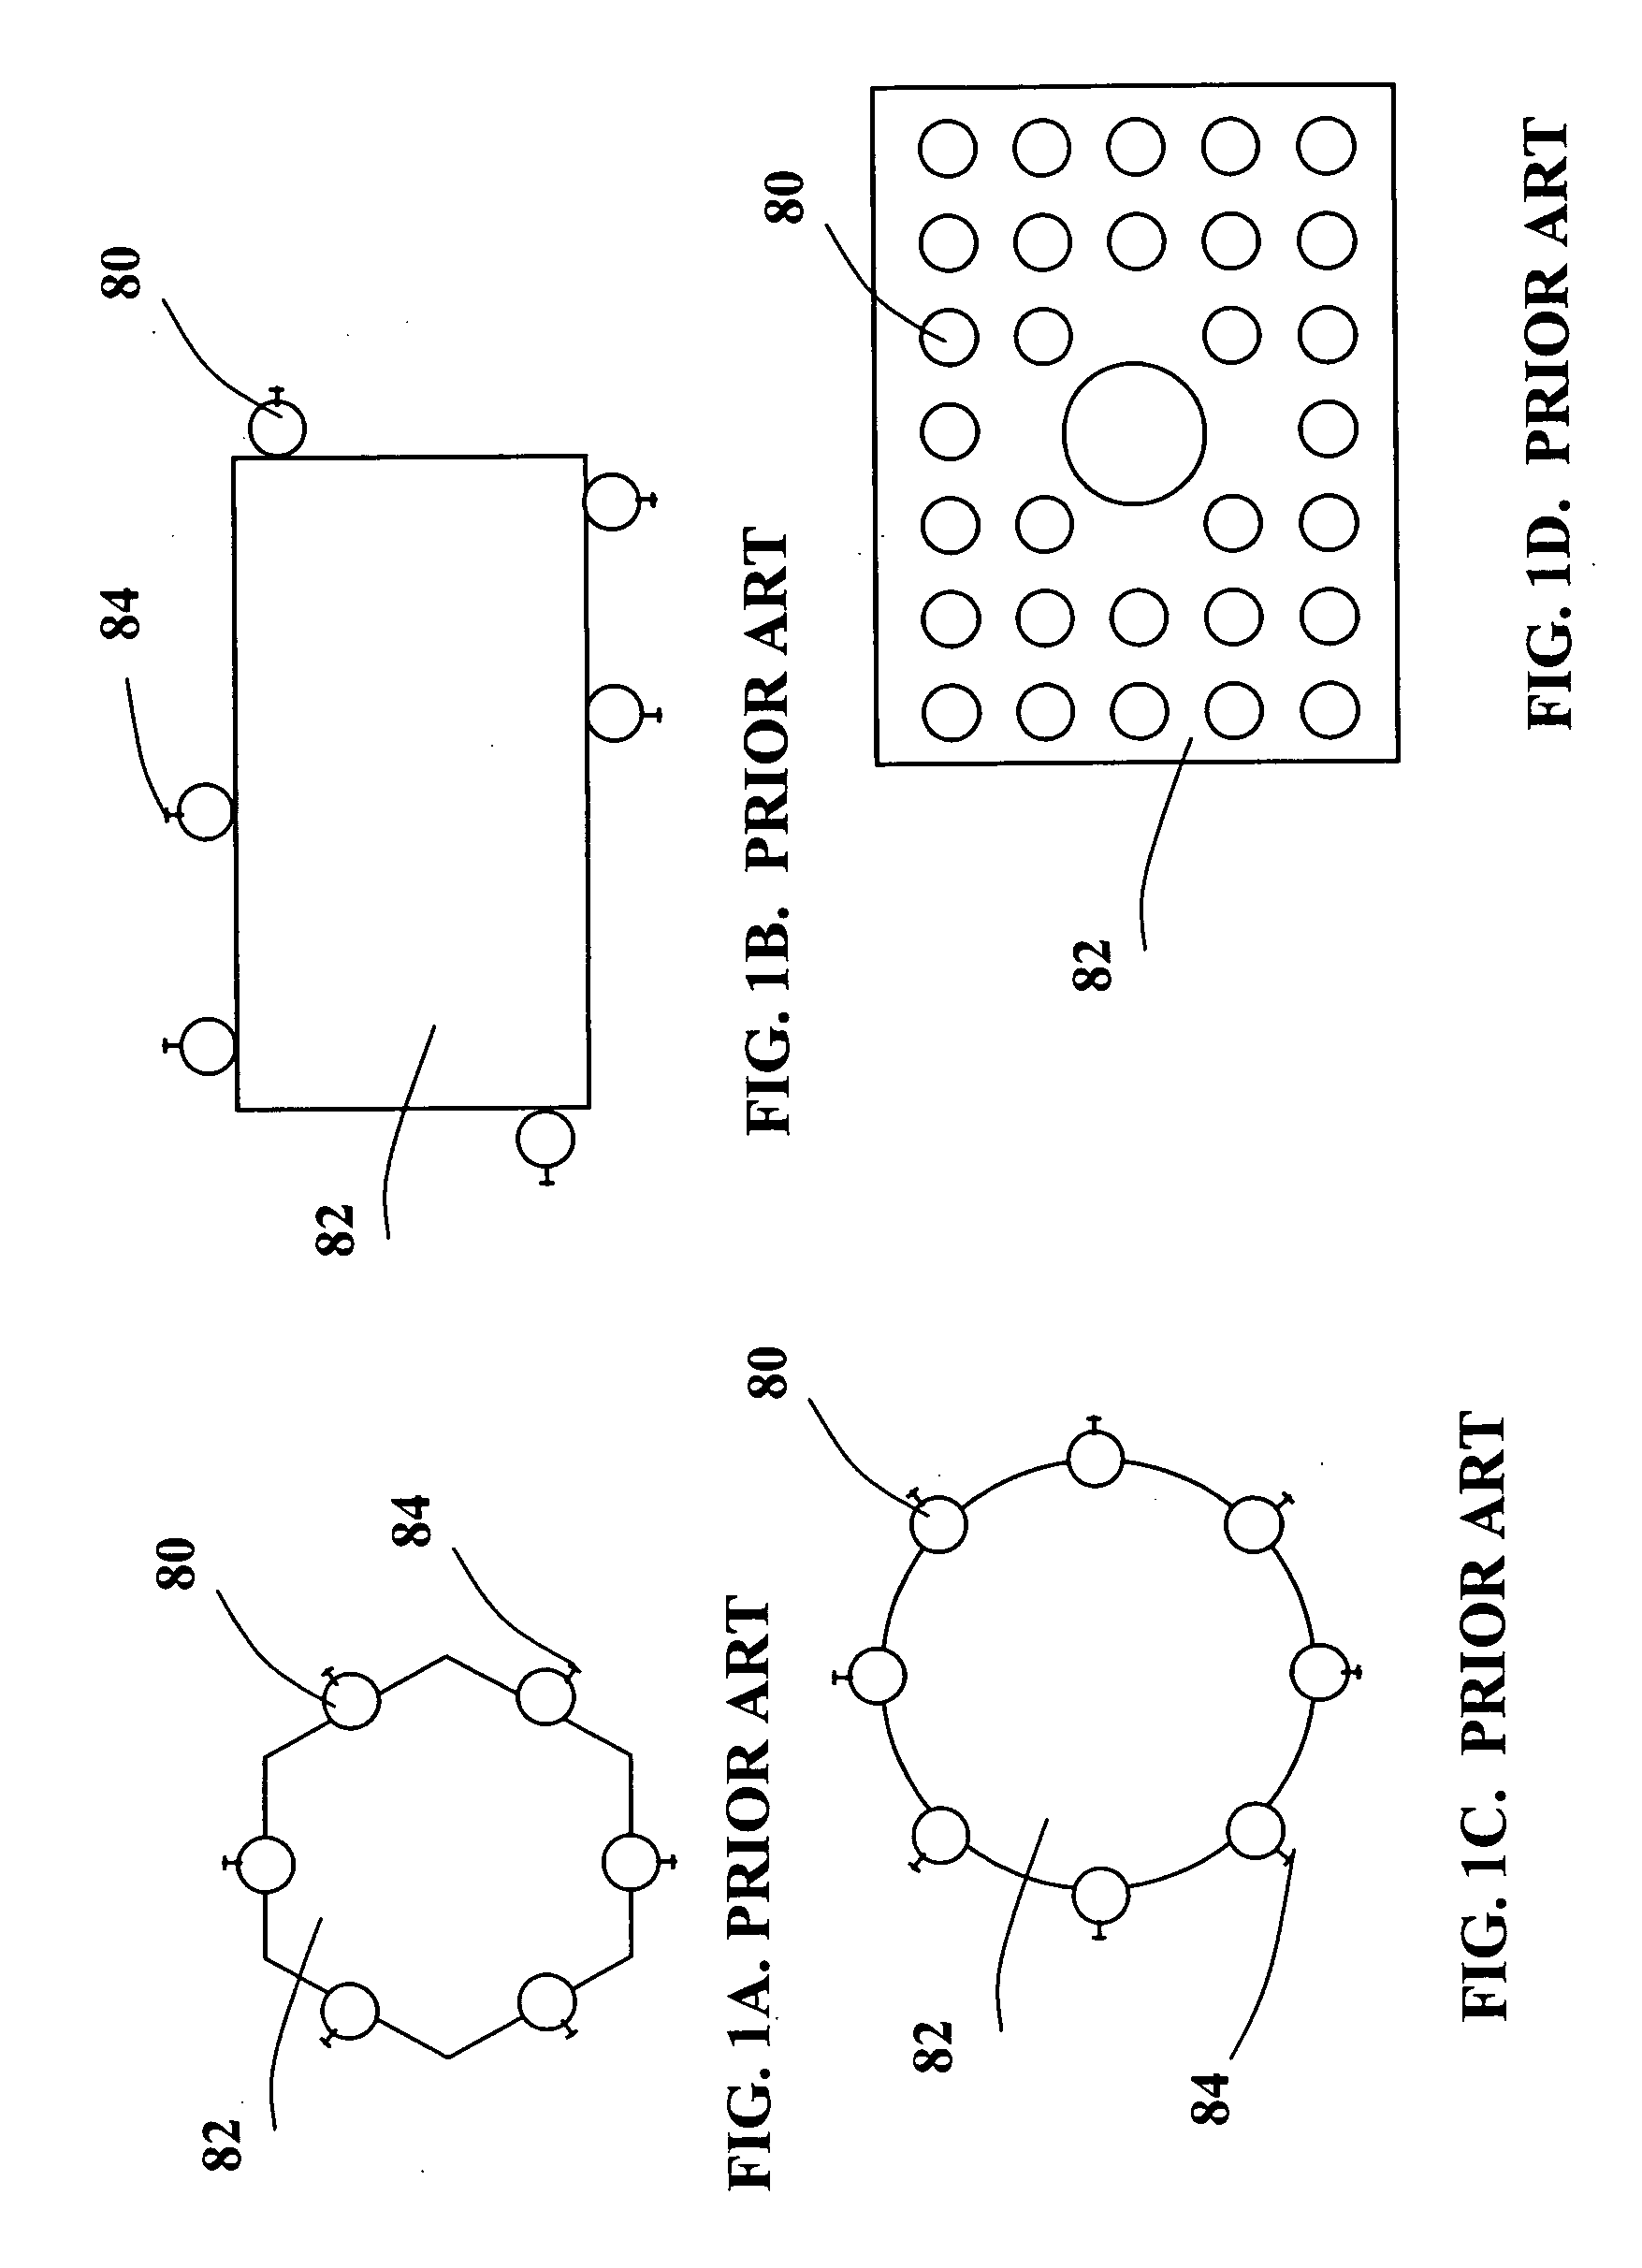 Polishing fixture for simultaneous loading of a plurality of optical connectors and fiber stubs and a method of loading